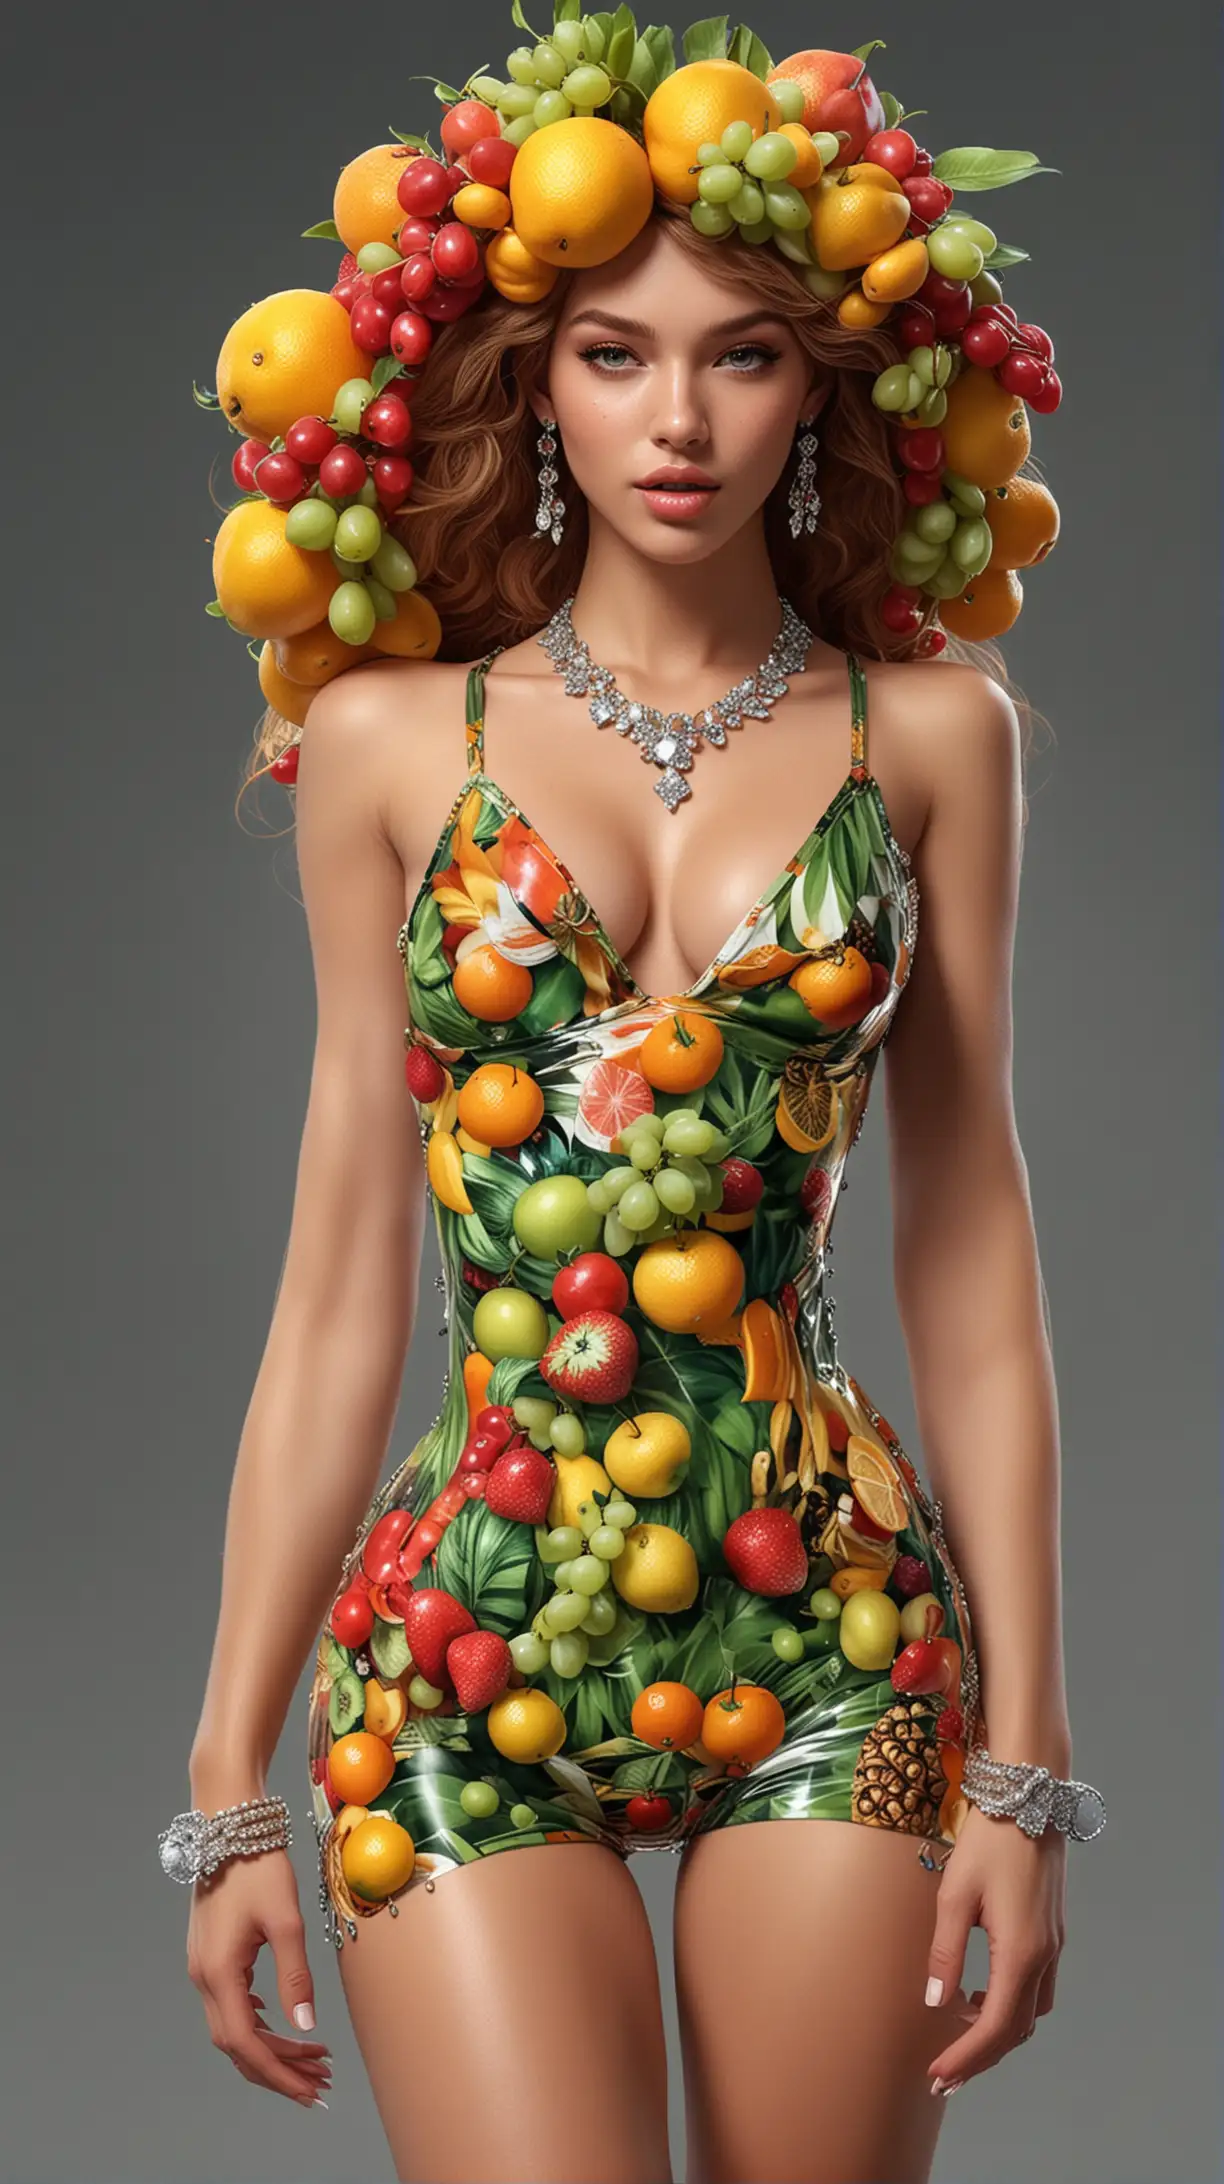 2024 Era Fashion Model Posing with Realistic Fruit Art Material and Diamond Accessories